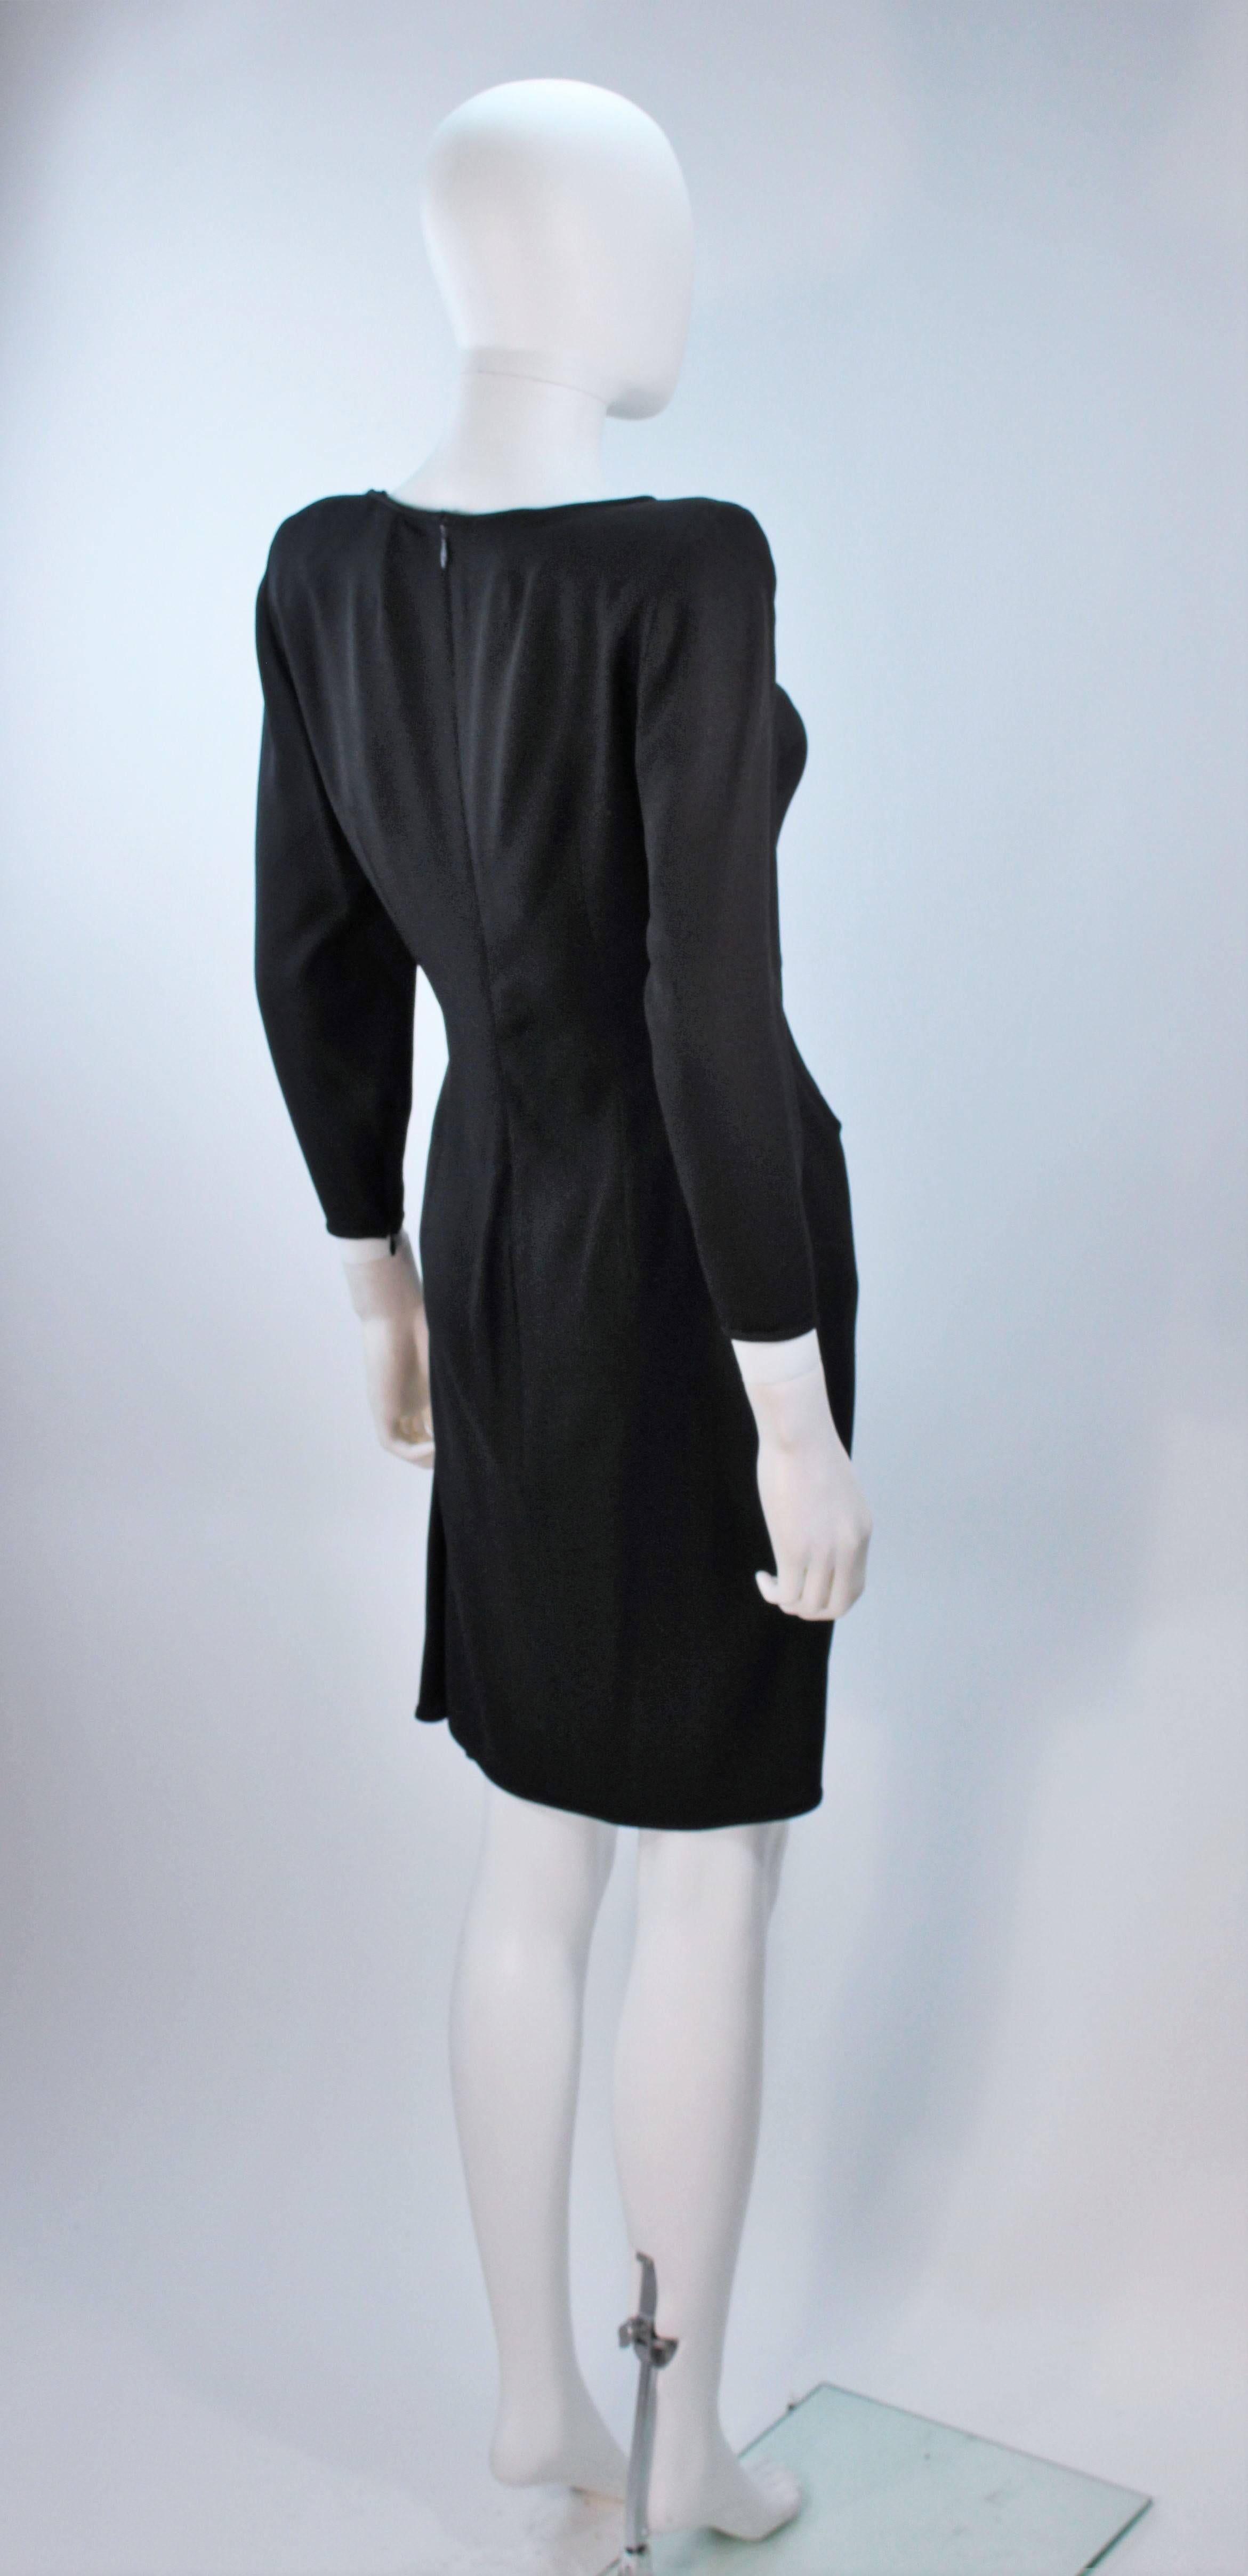 VALENTINO 1980'S Black Draped Cocktail Dress Size 6-8 For Sale 3